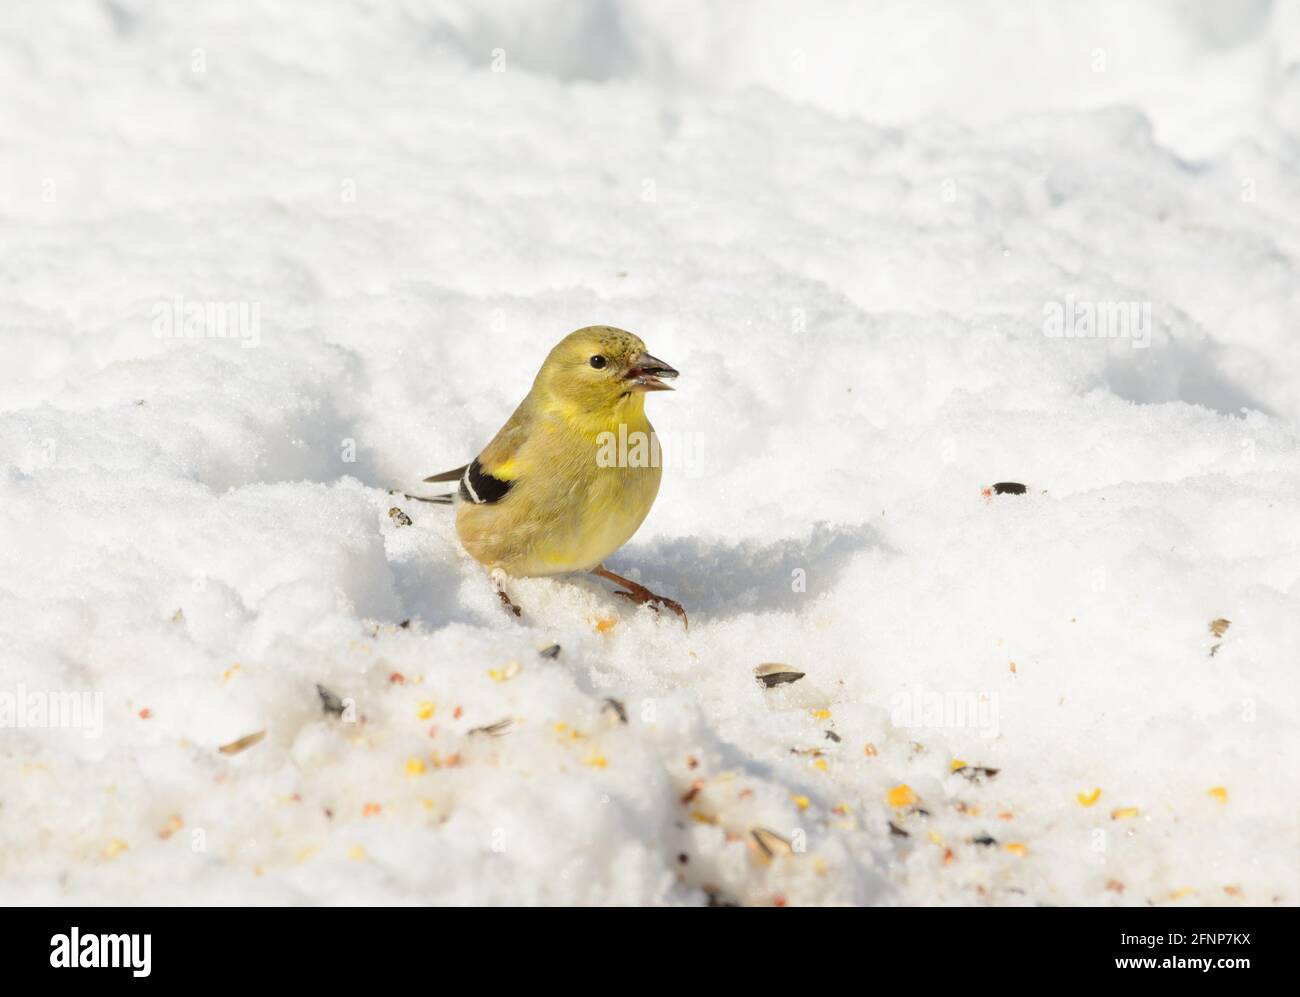 American Goldfinch sitting on snow, peeling a sunflower seed in his beak; on a sunny winter day Stock Photo